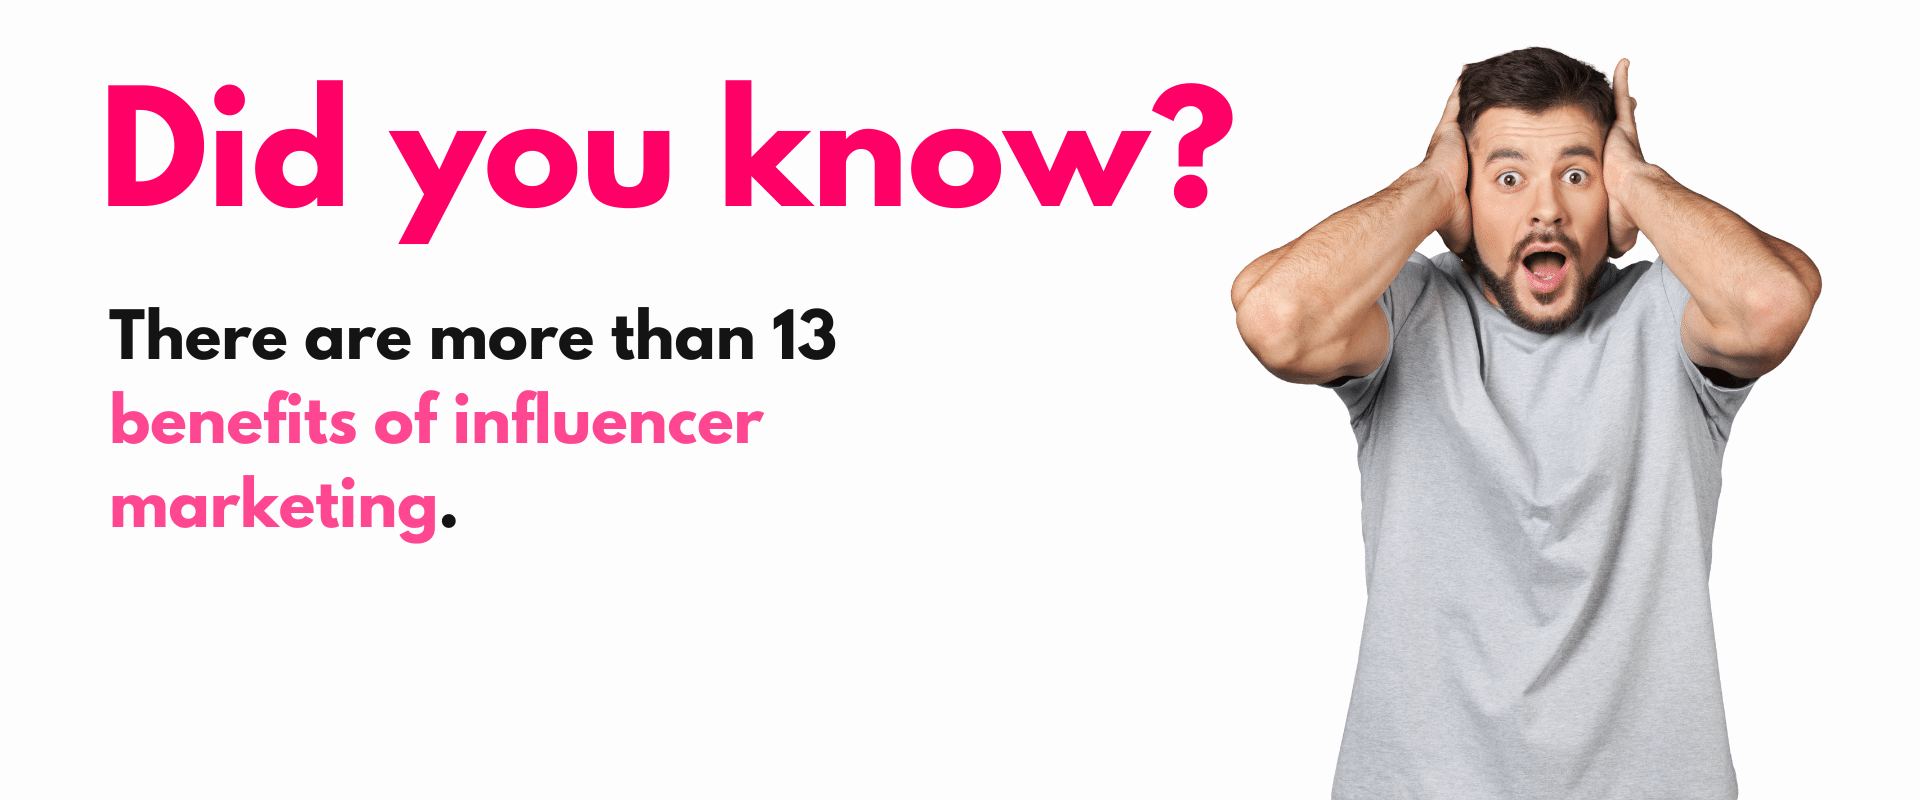 Did you know? there are more than 13 benefits of influencer marketing.